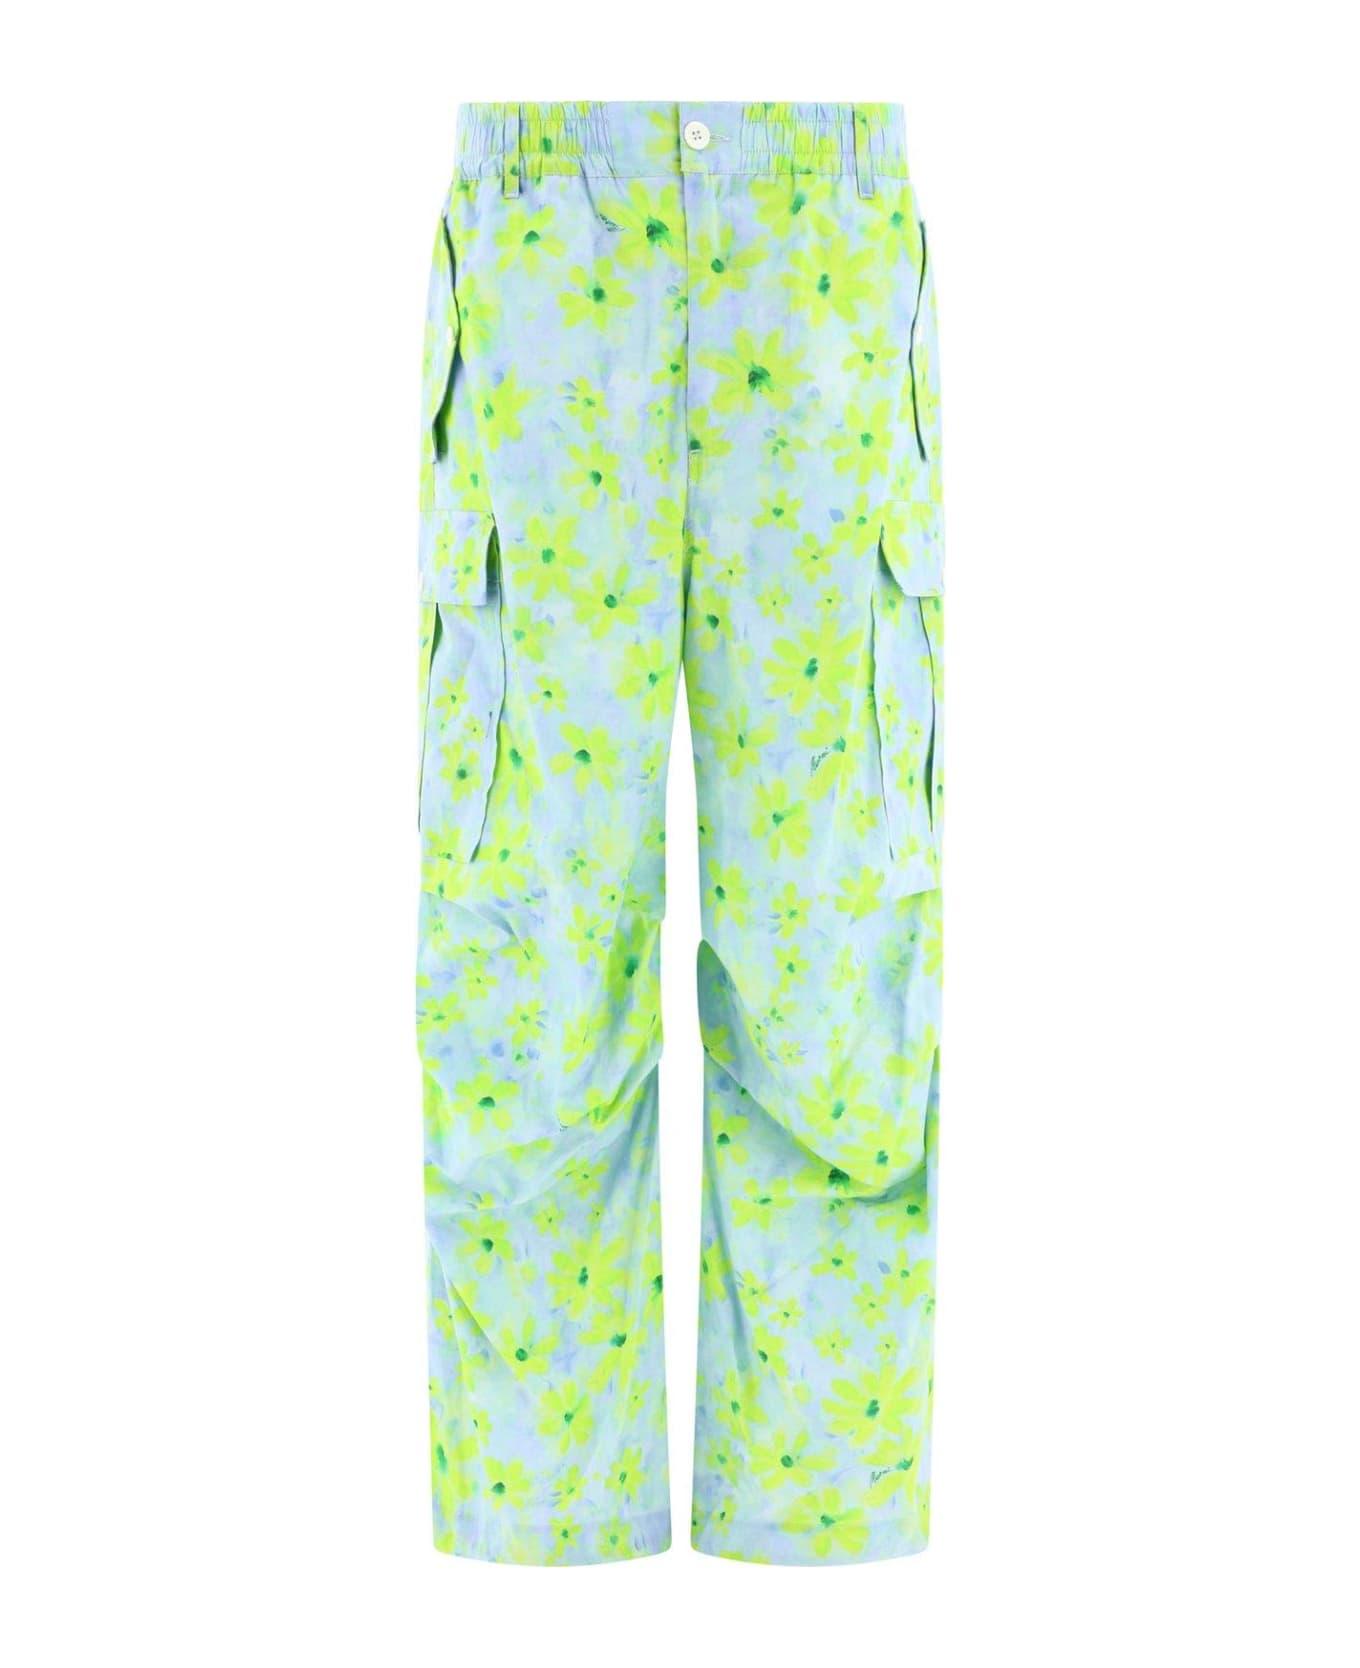 Marni Floral Printed Relaxed Fit Cargo Trousers - Water